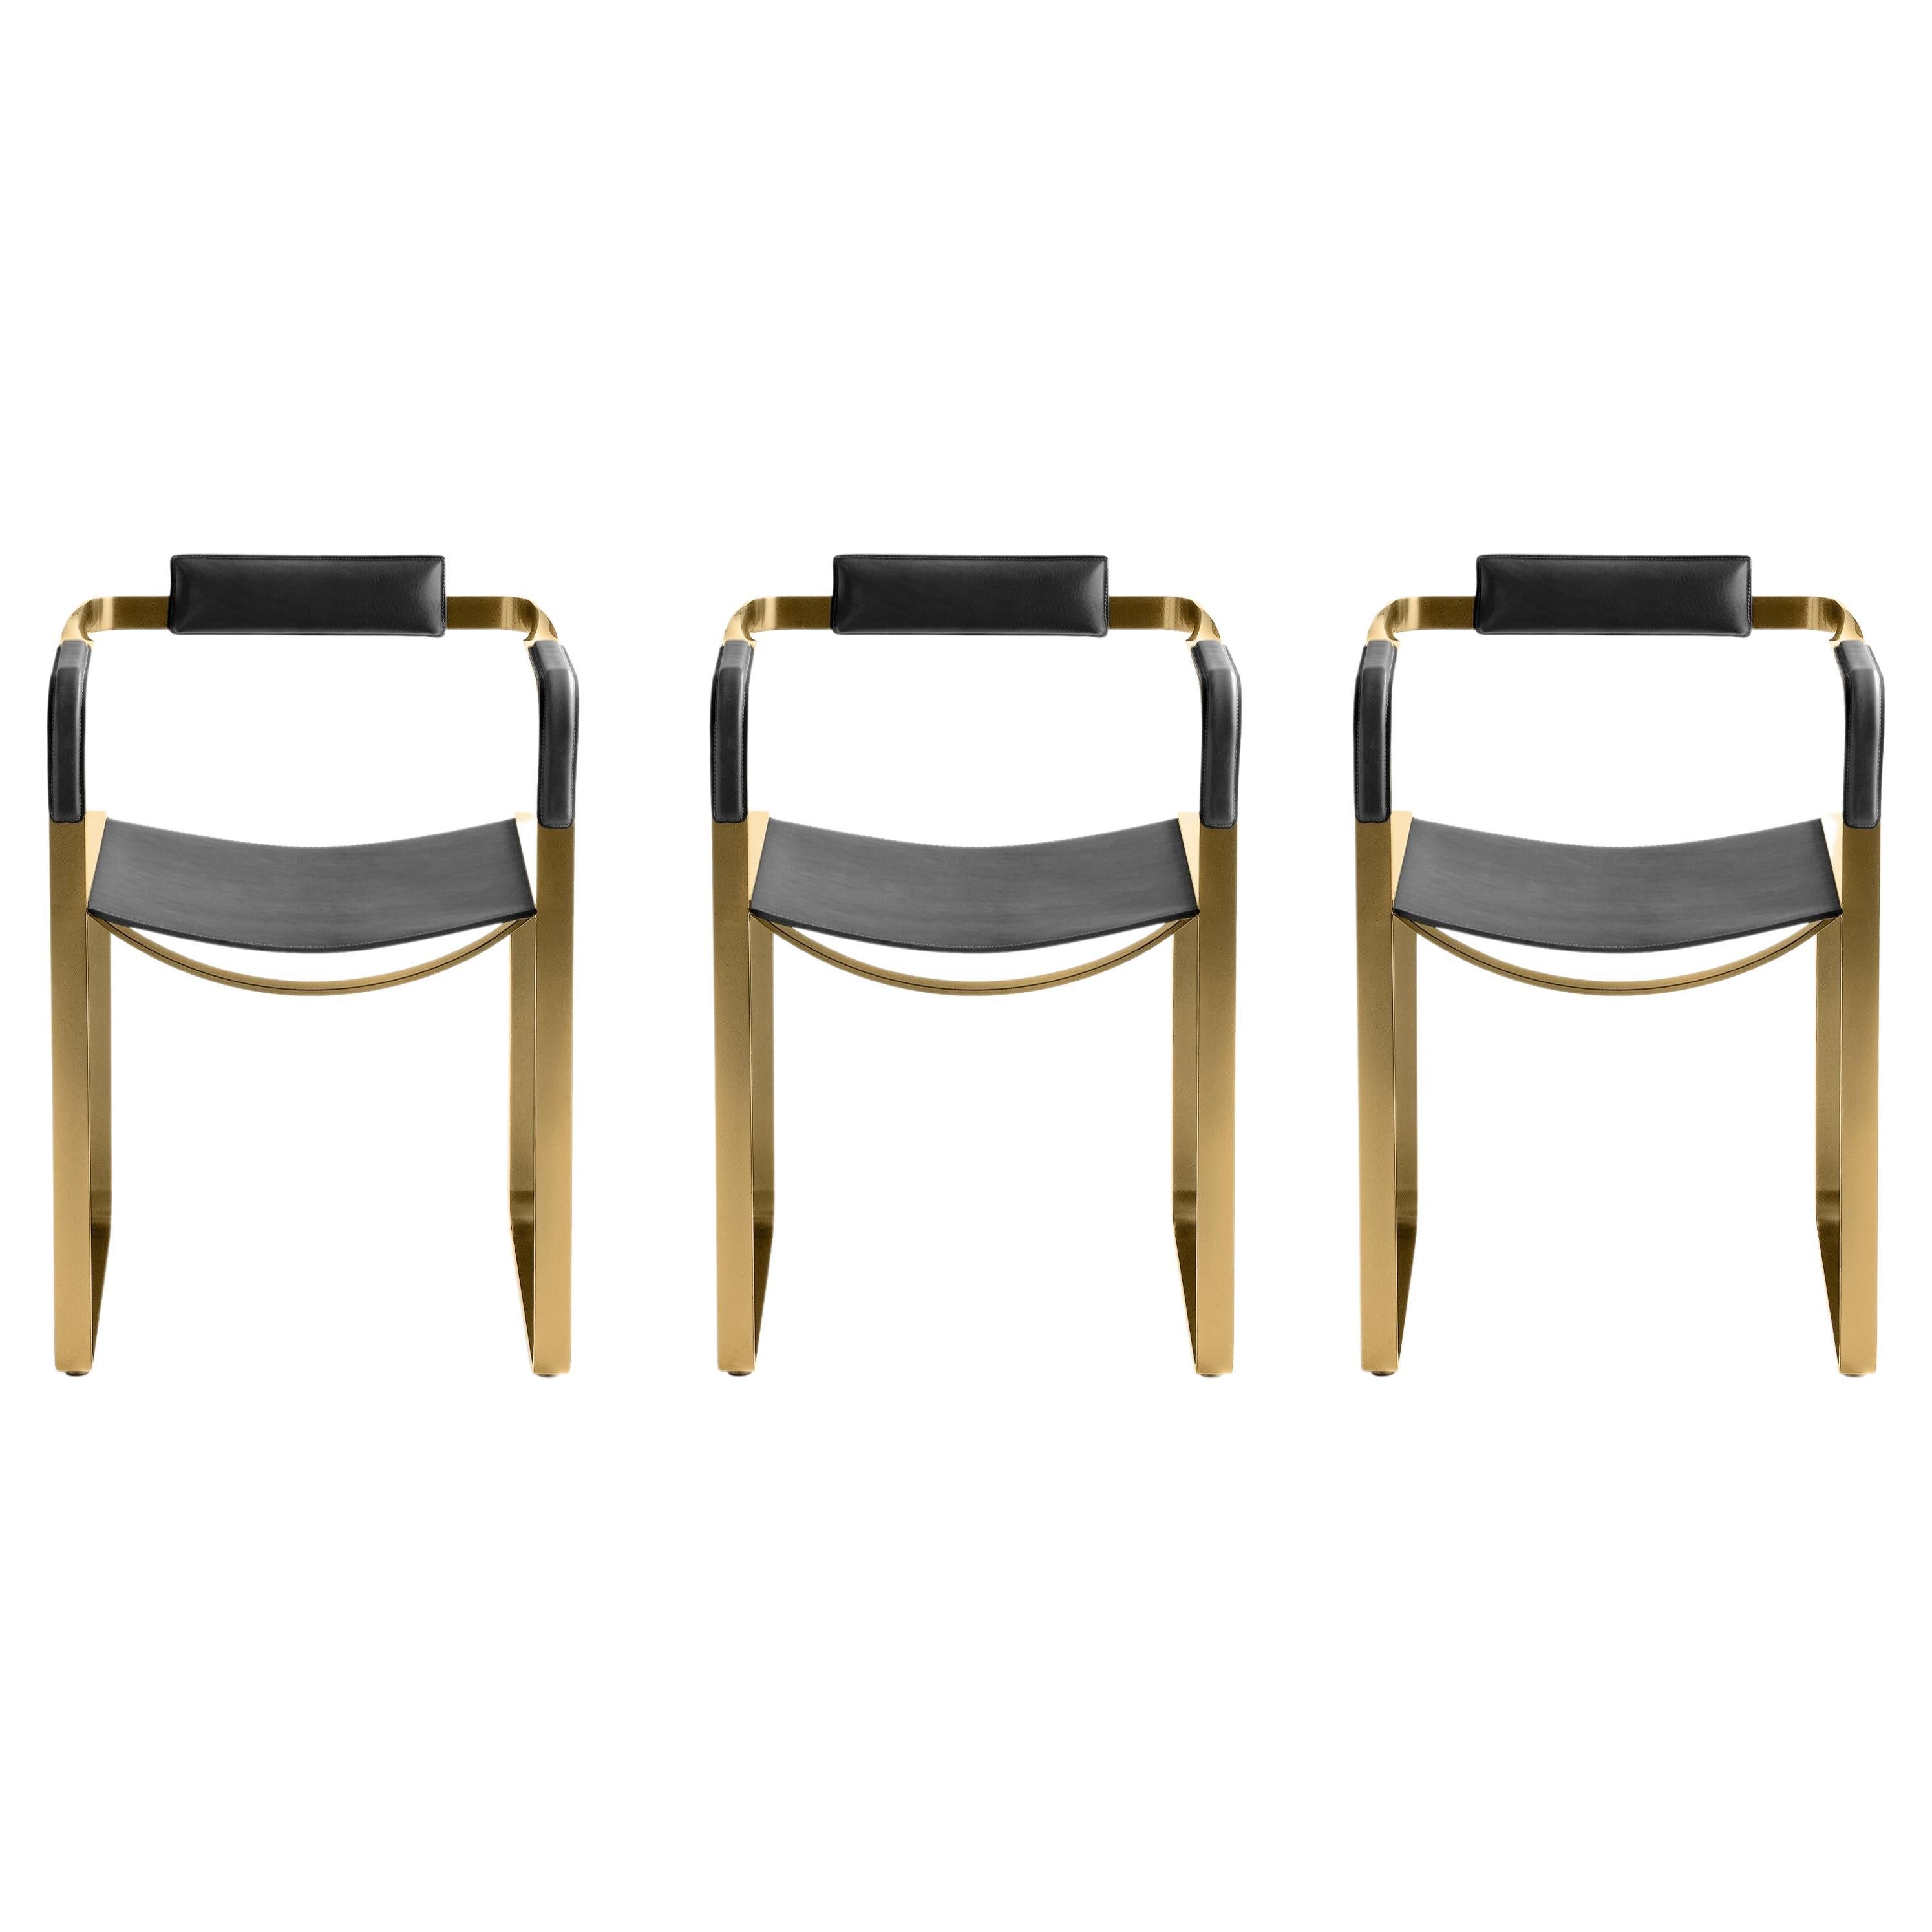 Set of 3 Armchair, Aged Brass Steel & Black Saddle Leather, Contemporary Style For Sale